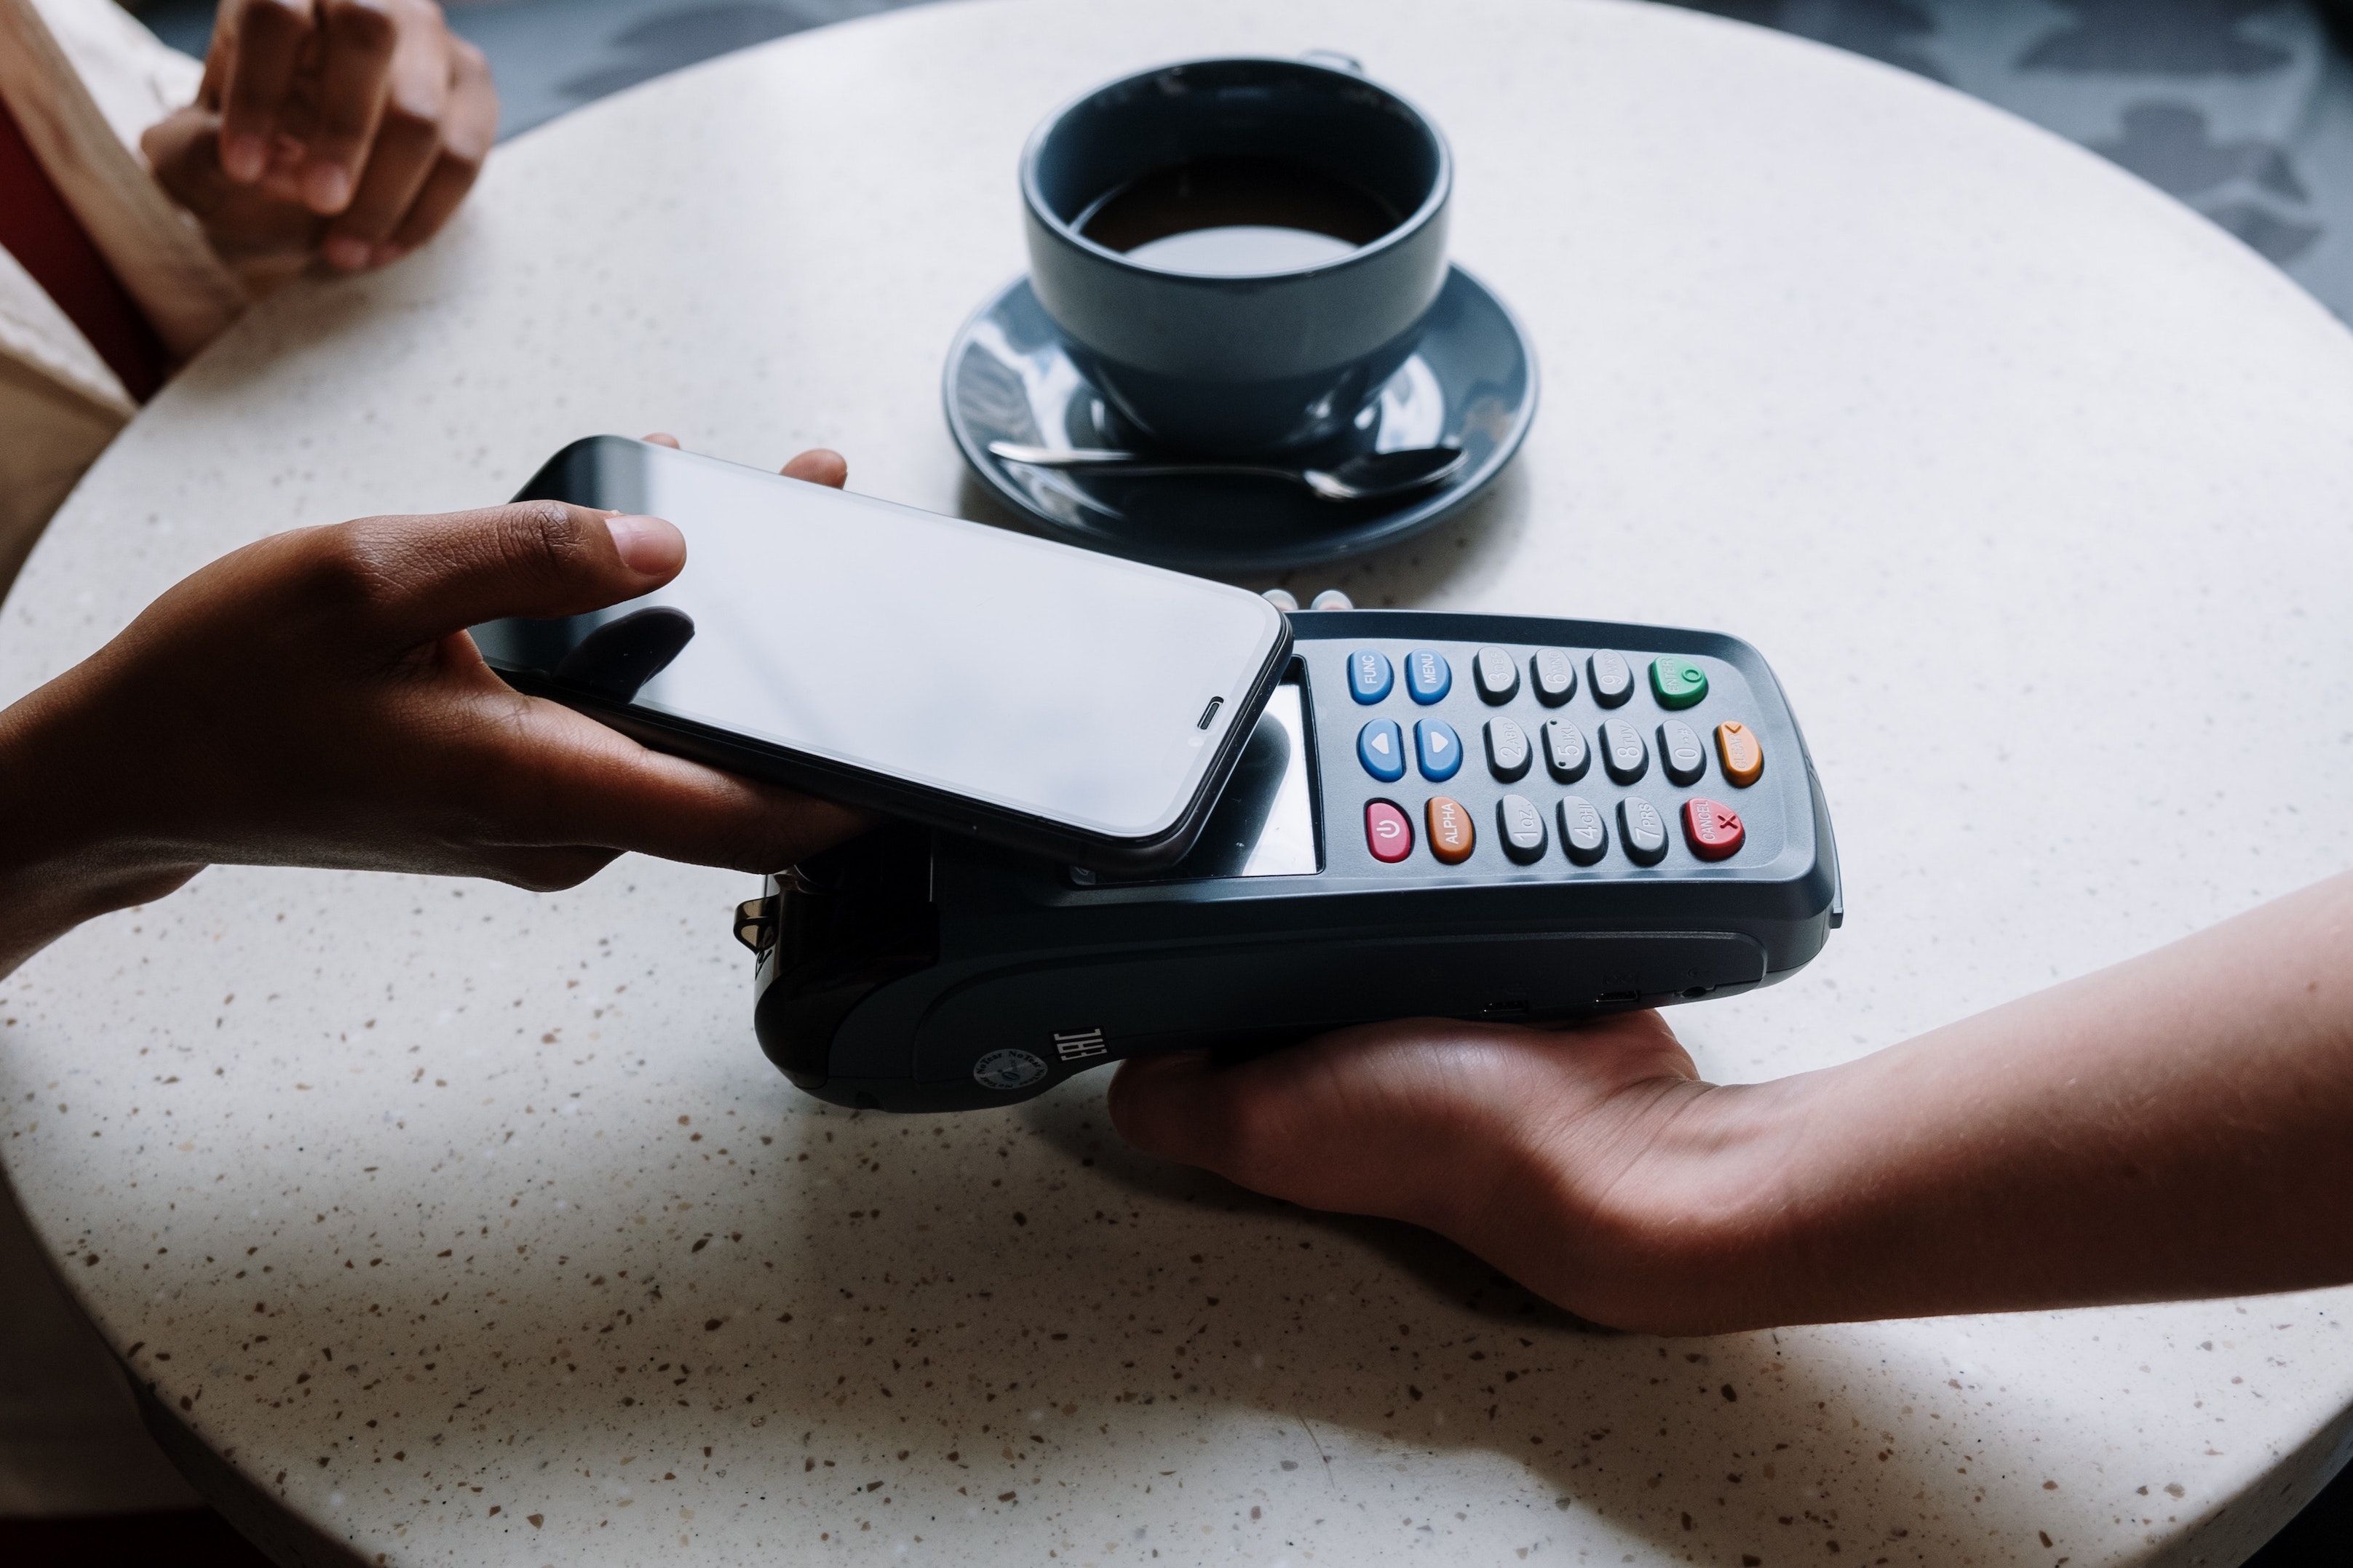 Atop a coffee table, a person taps a cardreader with an iPhone to make a purchase